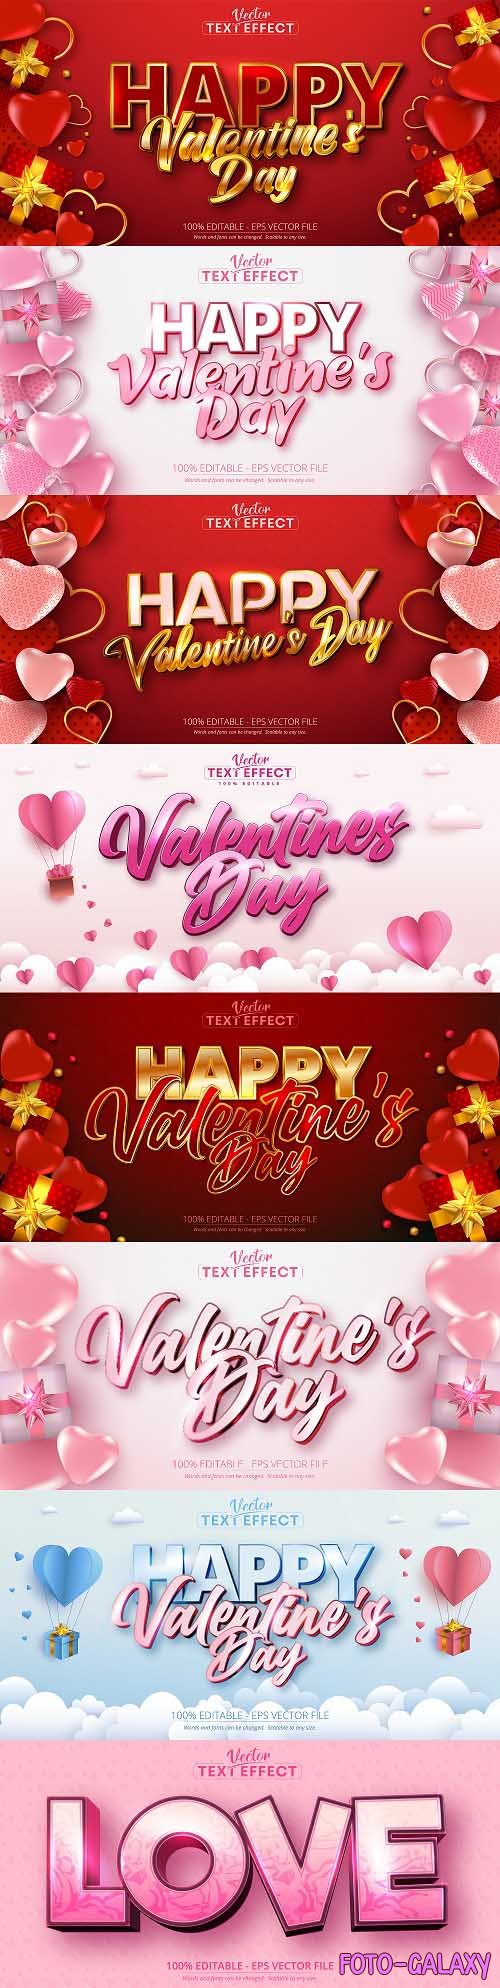 Editable font effect text collection illustration design 244 - Valentine's Day